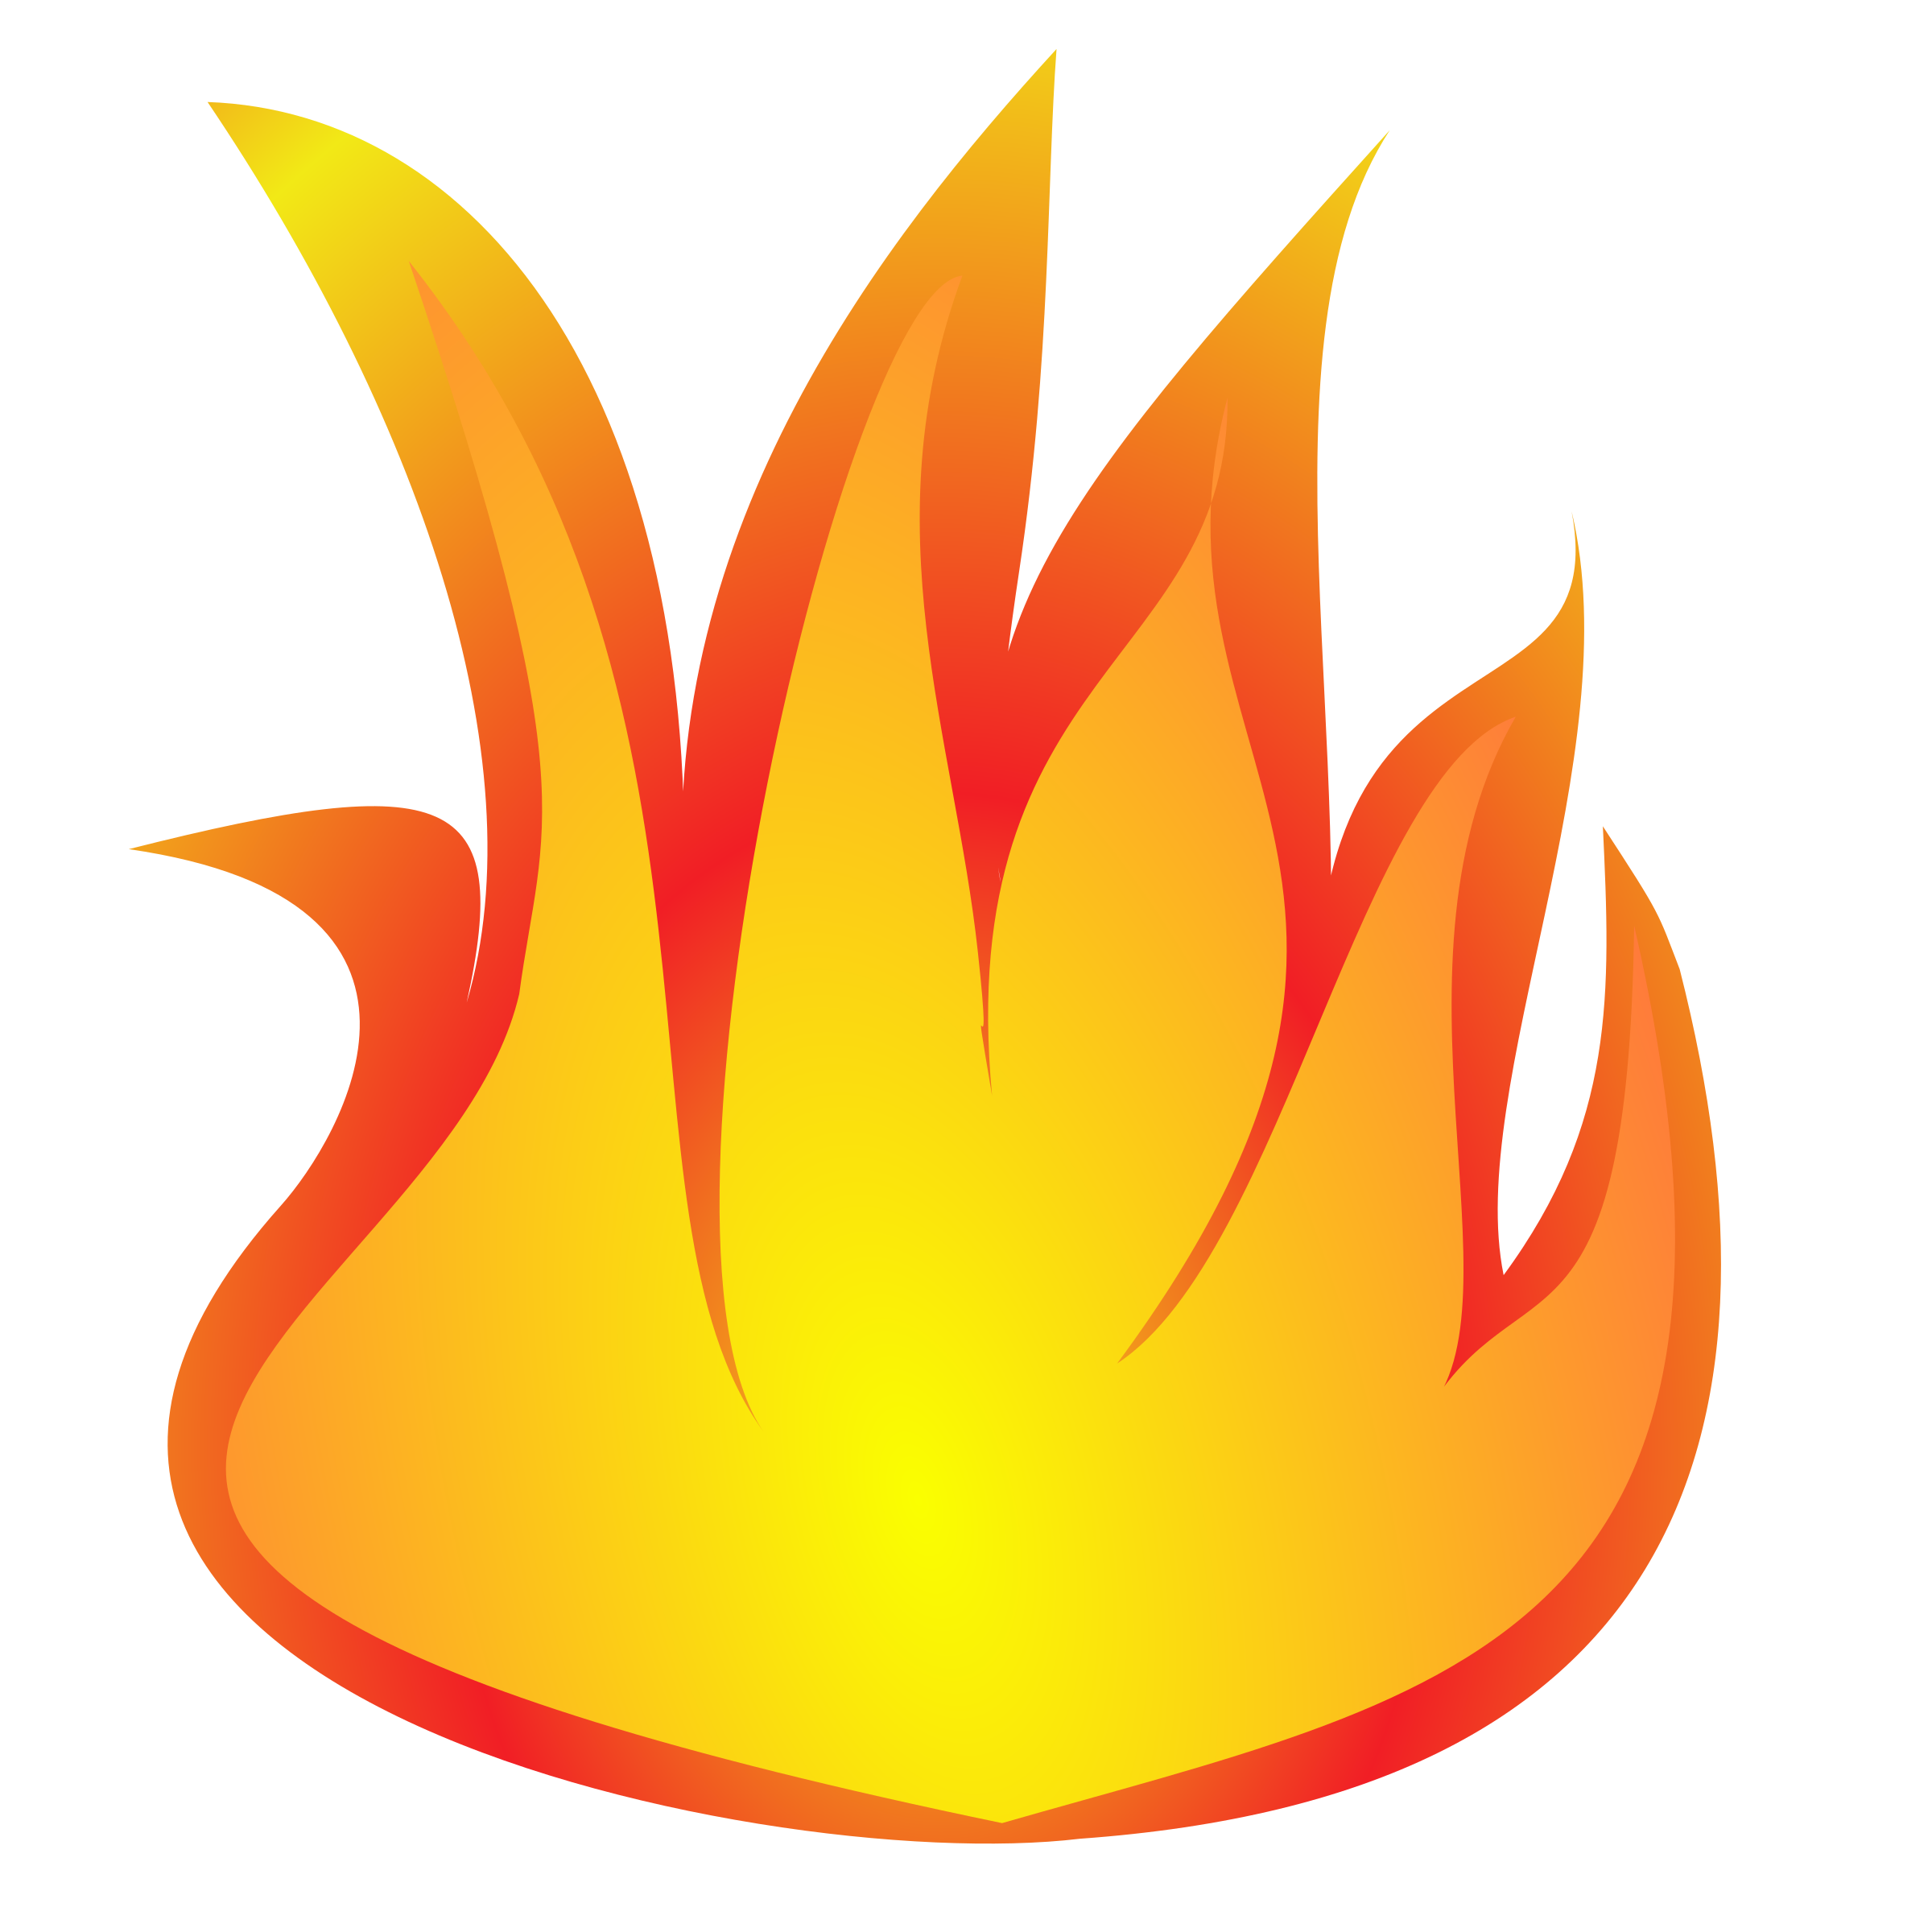 fire clipart free download - photo #27